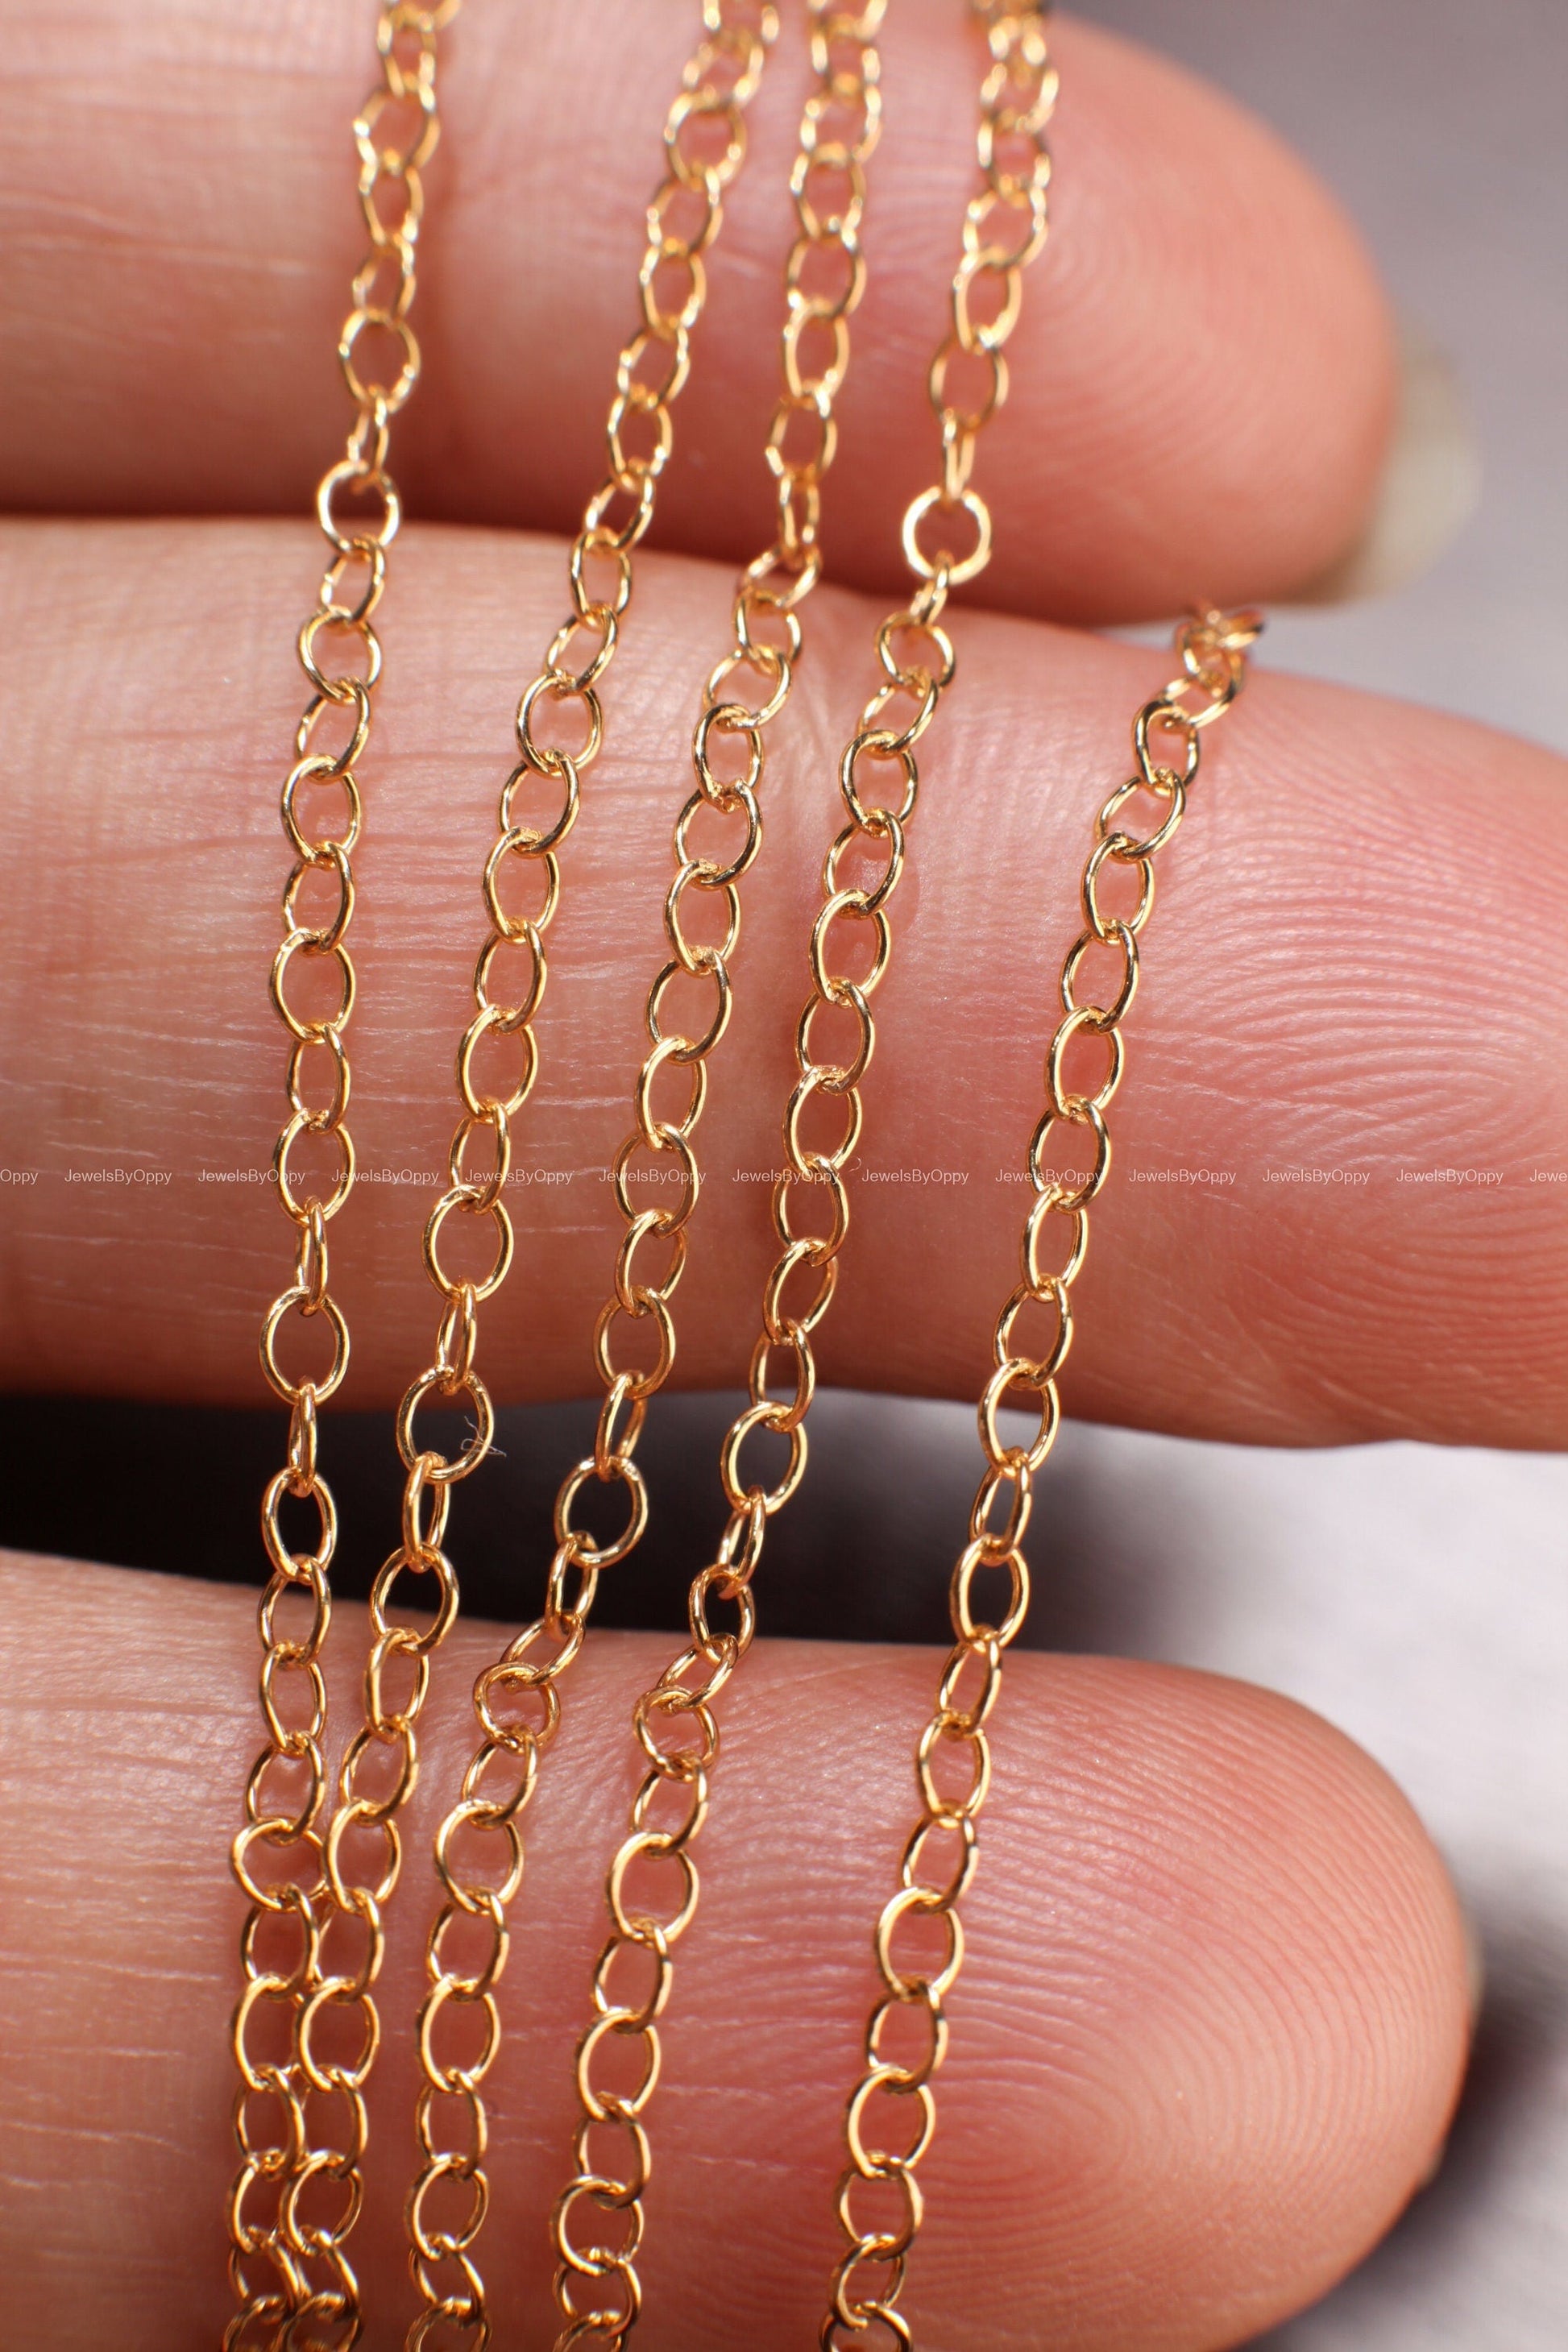 14K Gold Filled Cable Chain, 1.7x2.45mm Small Round Cable Chain, Jewelry Making Unfinished Italian Chain